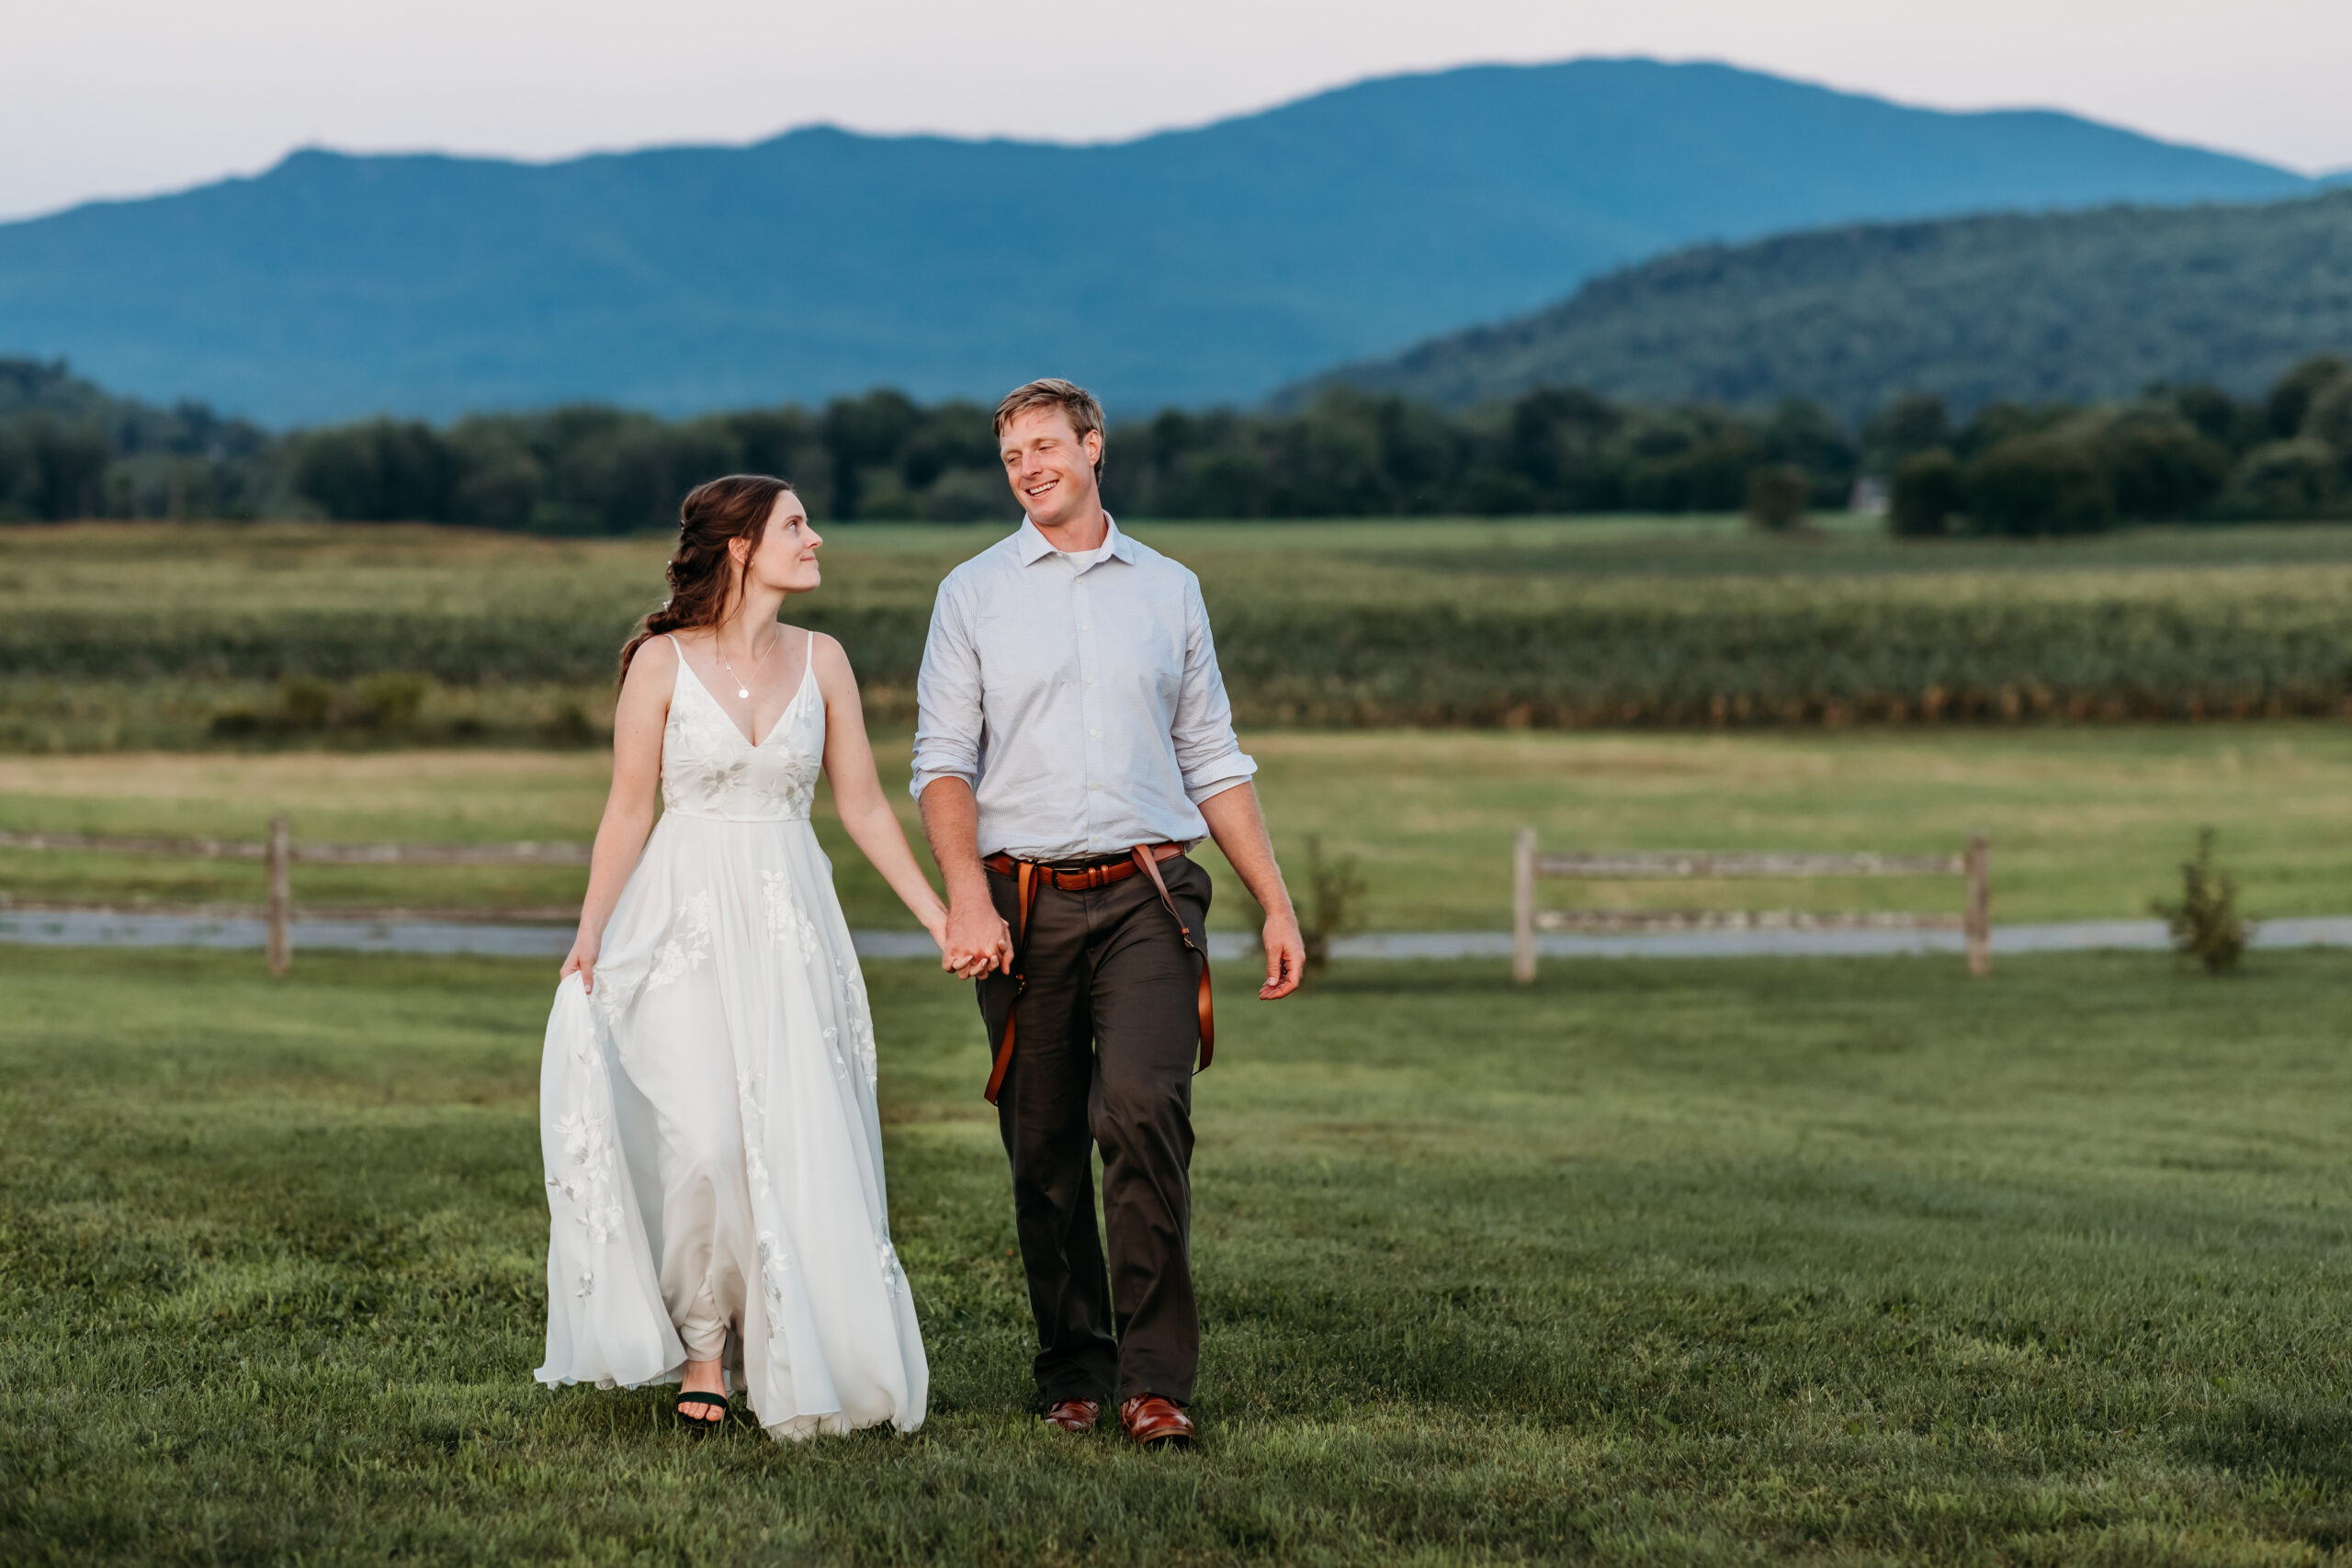 Jess and Greg holding hands and walking together outside at their Vermont farm wedding venue with mountains views